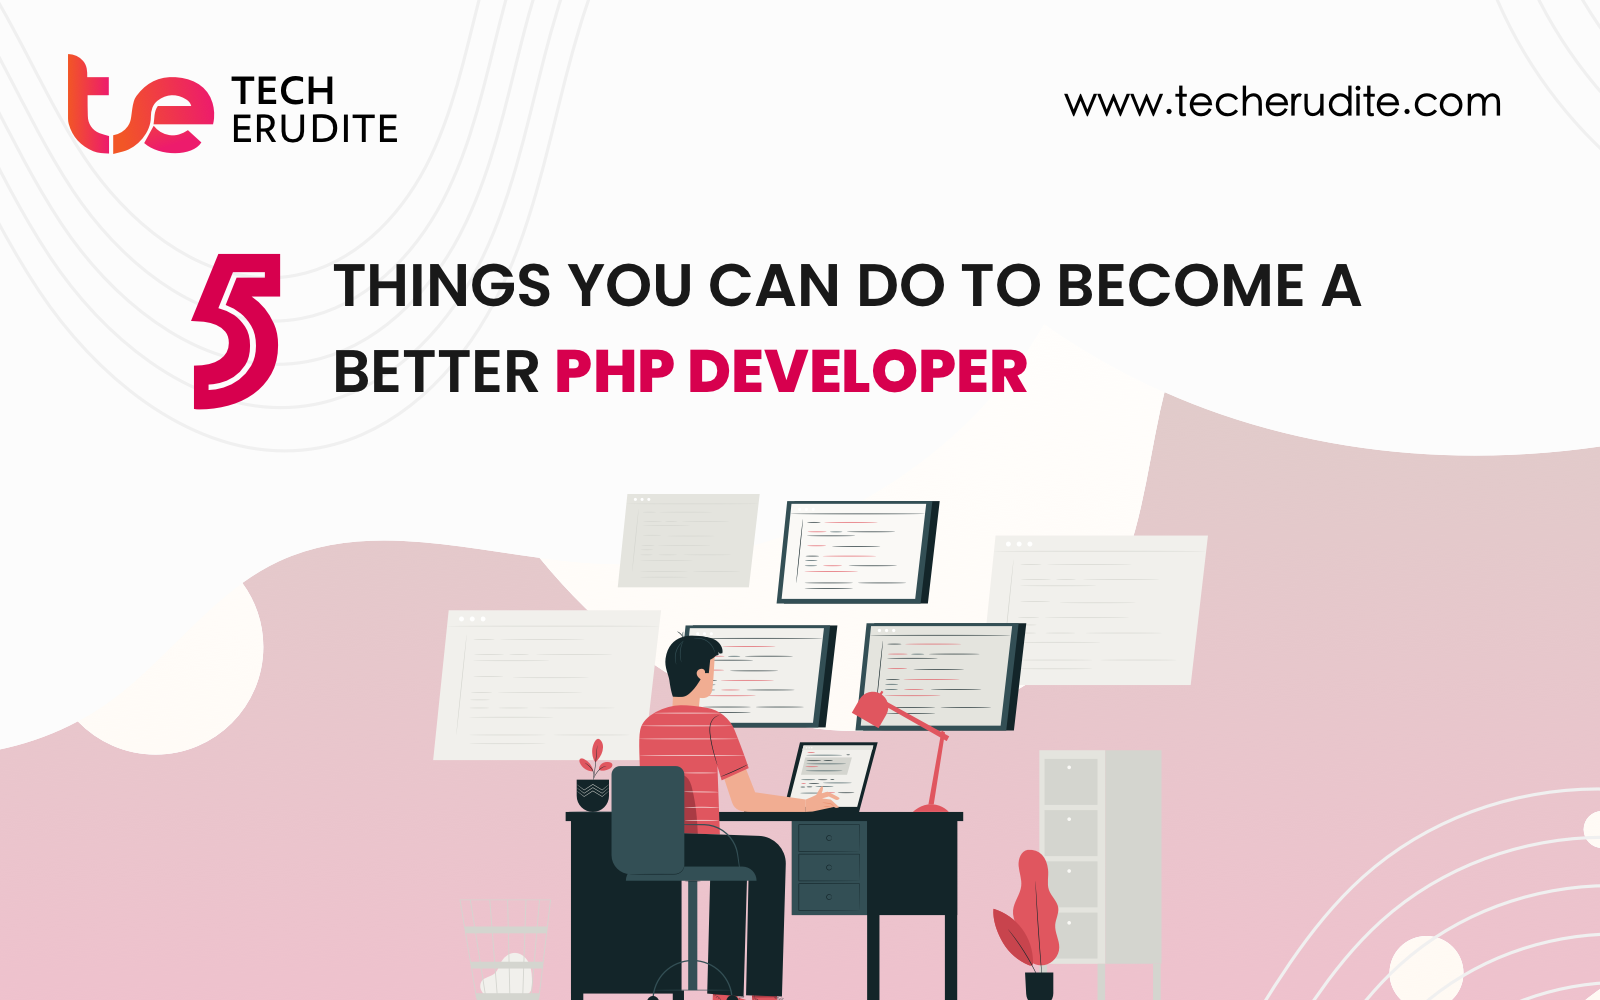 5 Things You Can Do to Become a Better PHP Developer